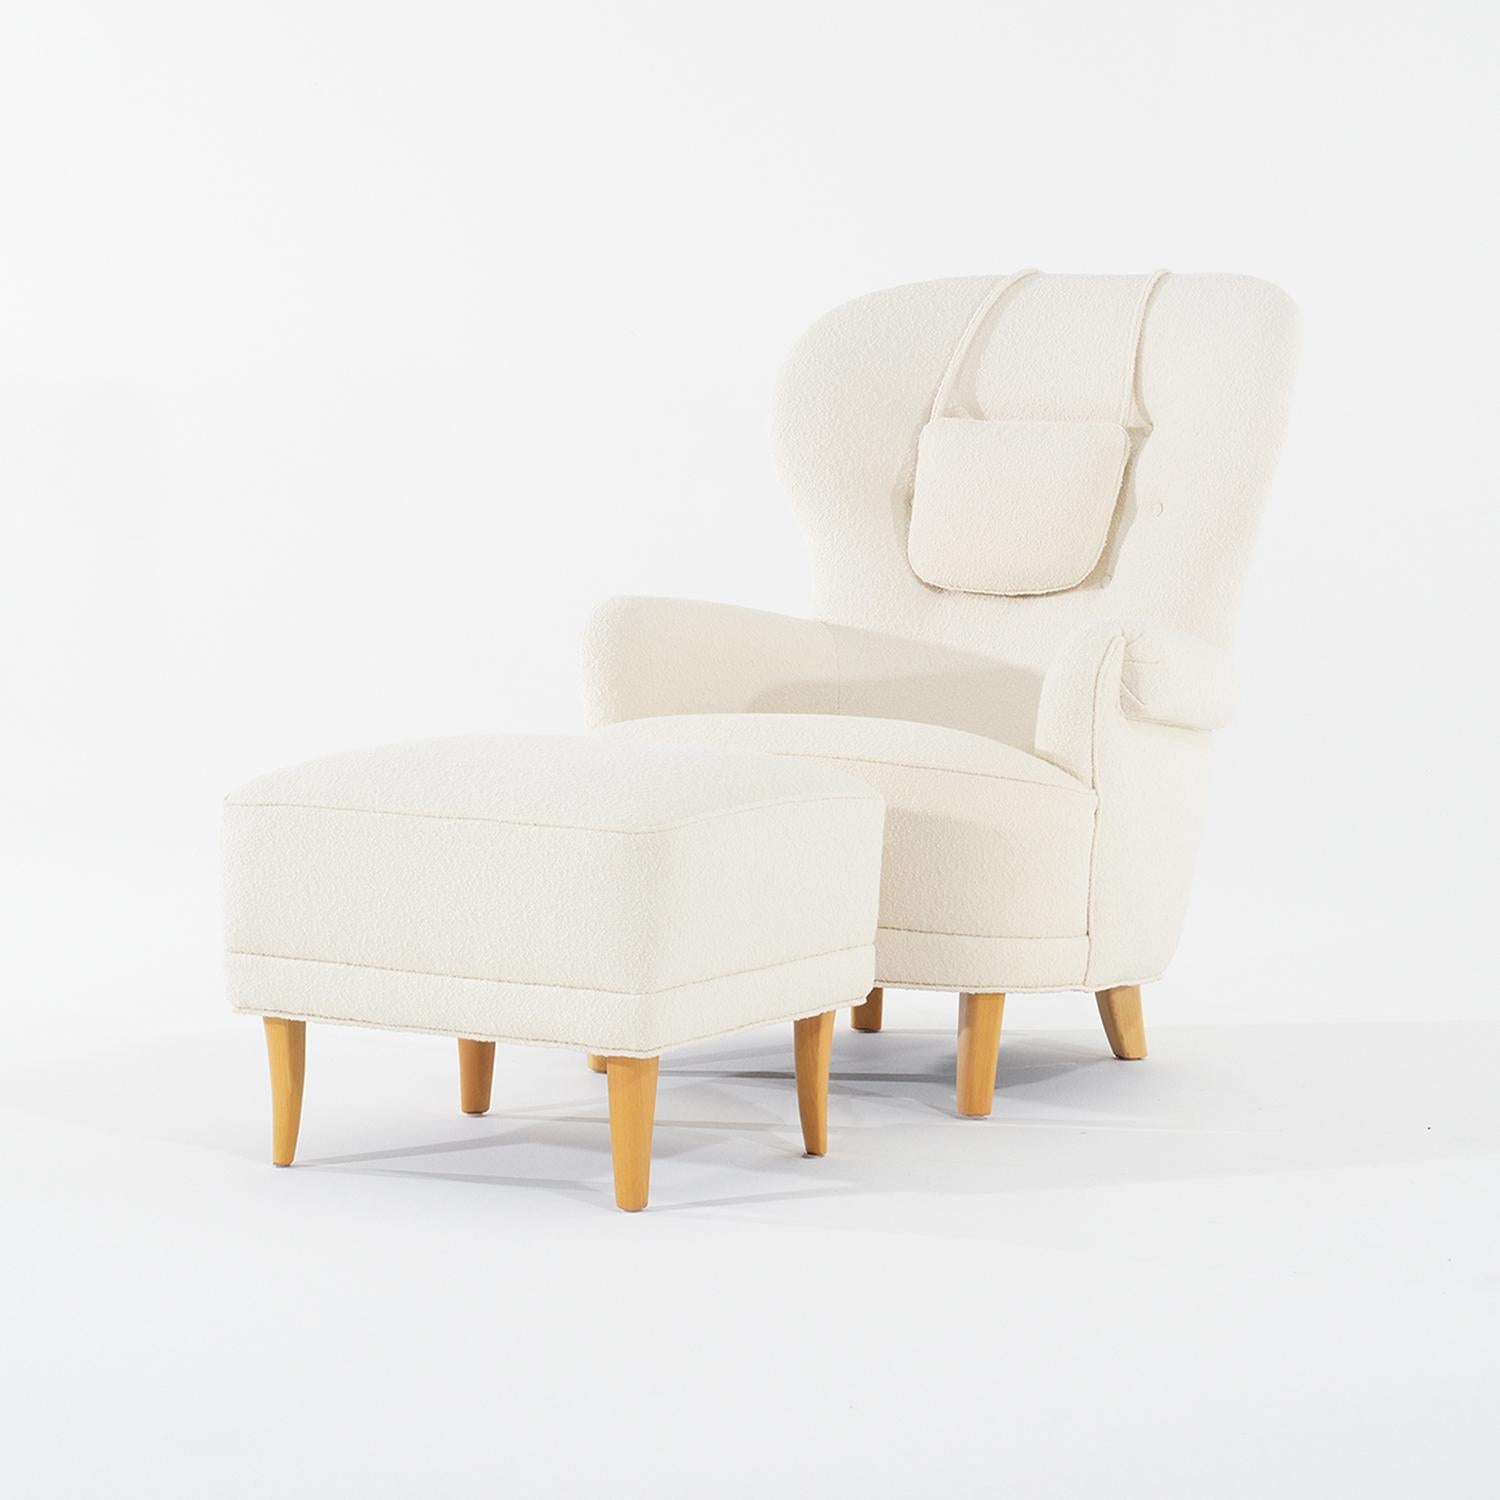 20th Century Swedish Vintage Rundrygg Lounge Chair & Footstool by Carl Malmsten In Good Condition For Sale In West Palm Beach, FL